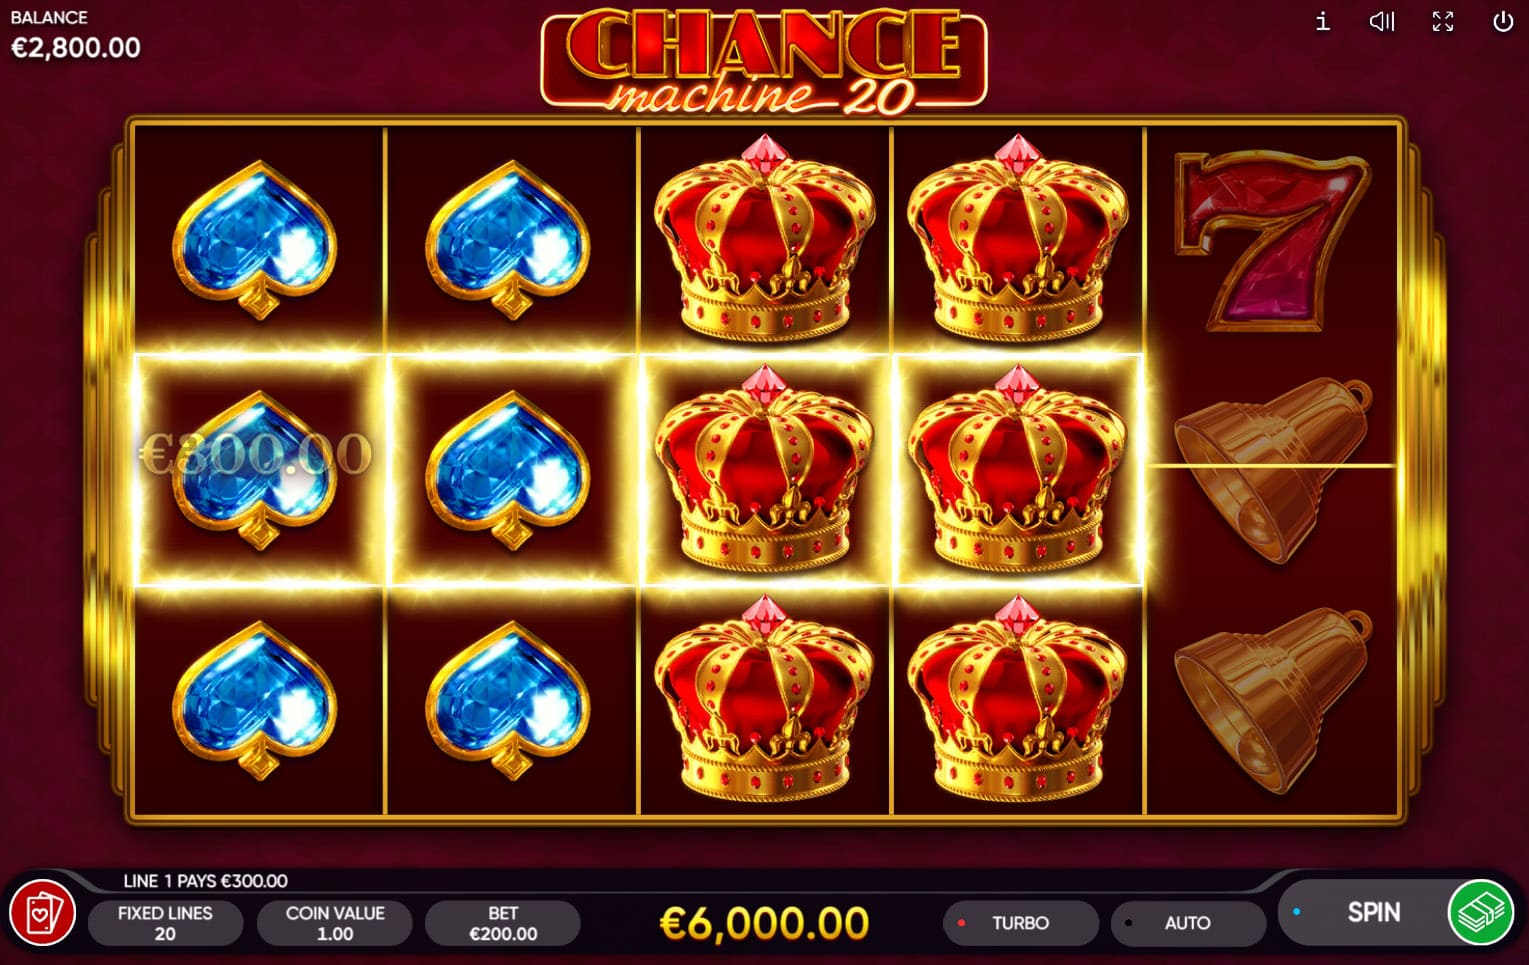 Chance Machine 20 Video Slot Review by Casinoid.in